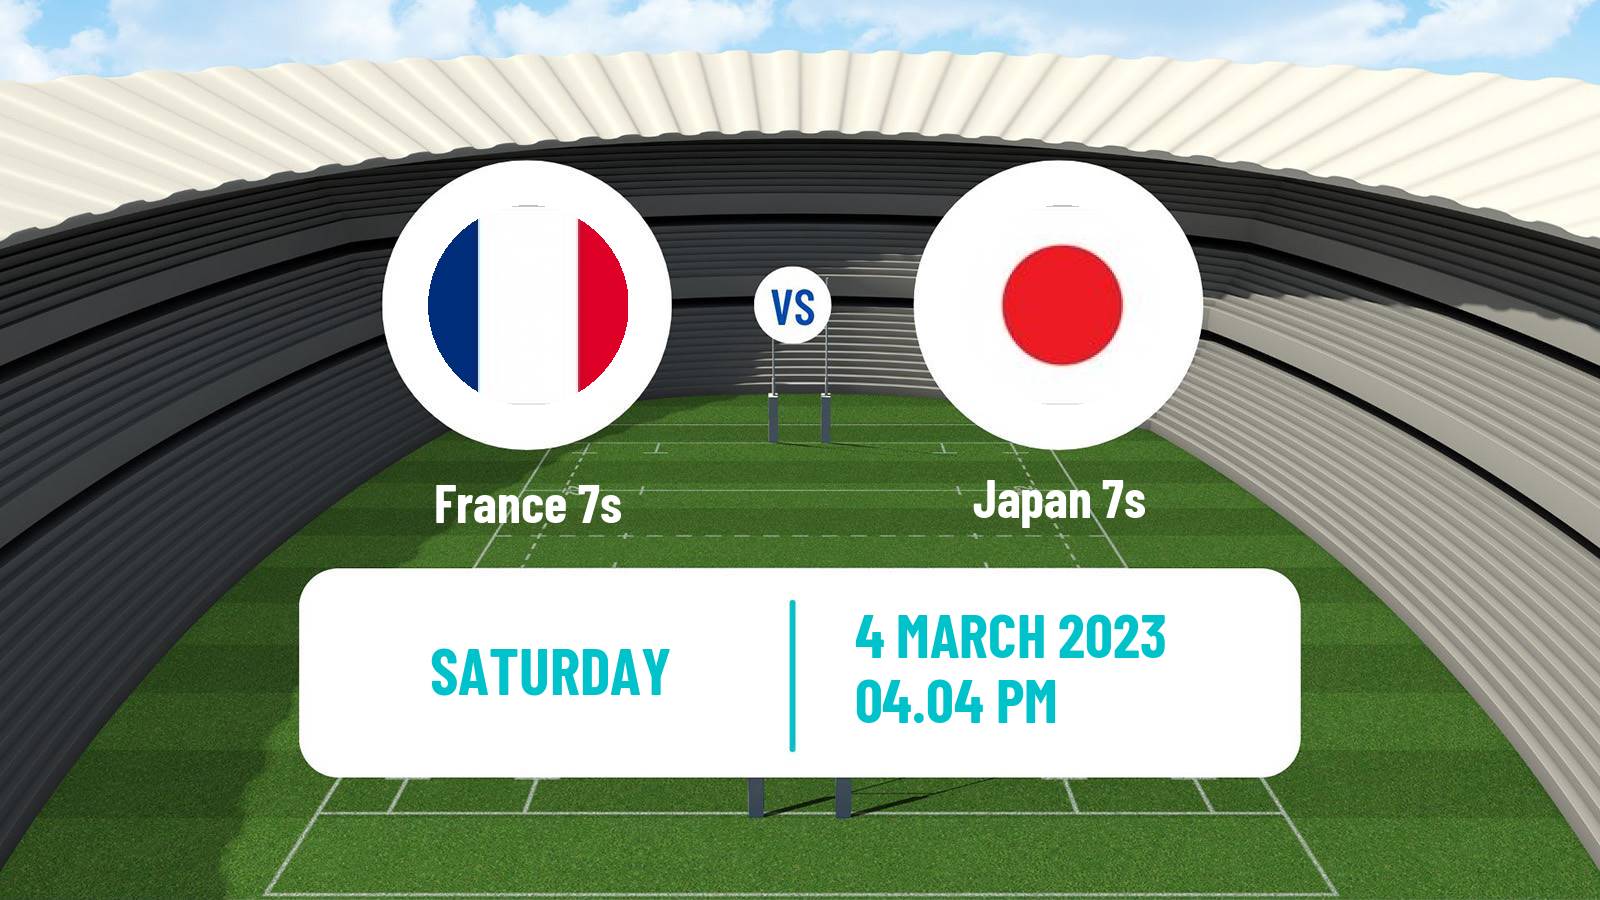 Rugby union Sevens World Series - Canada France 7s - Japan 7s